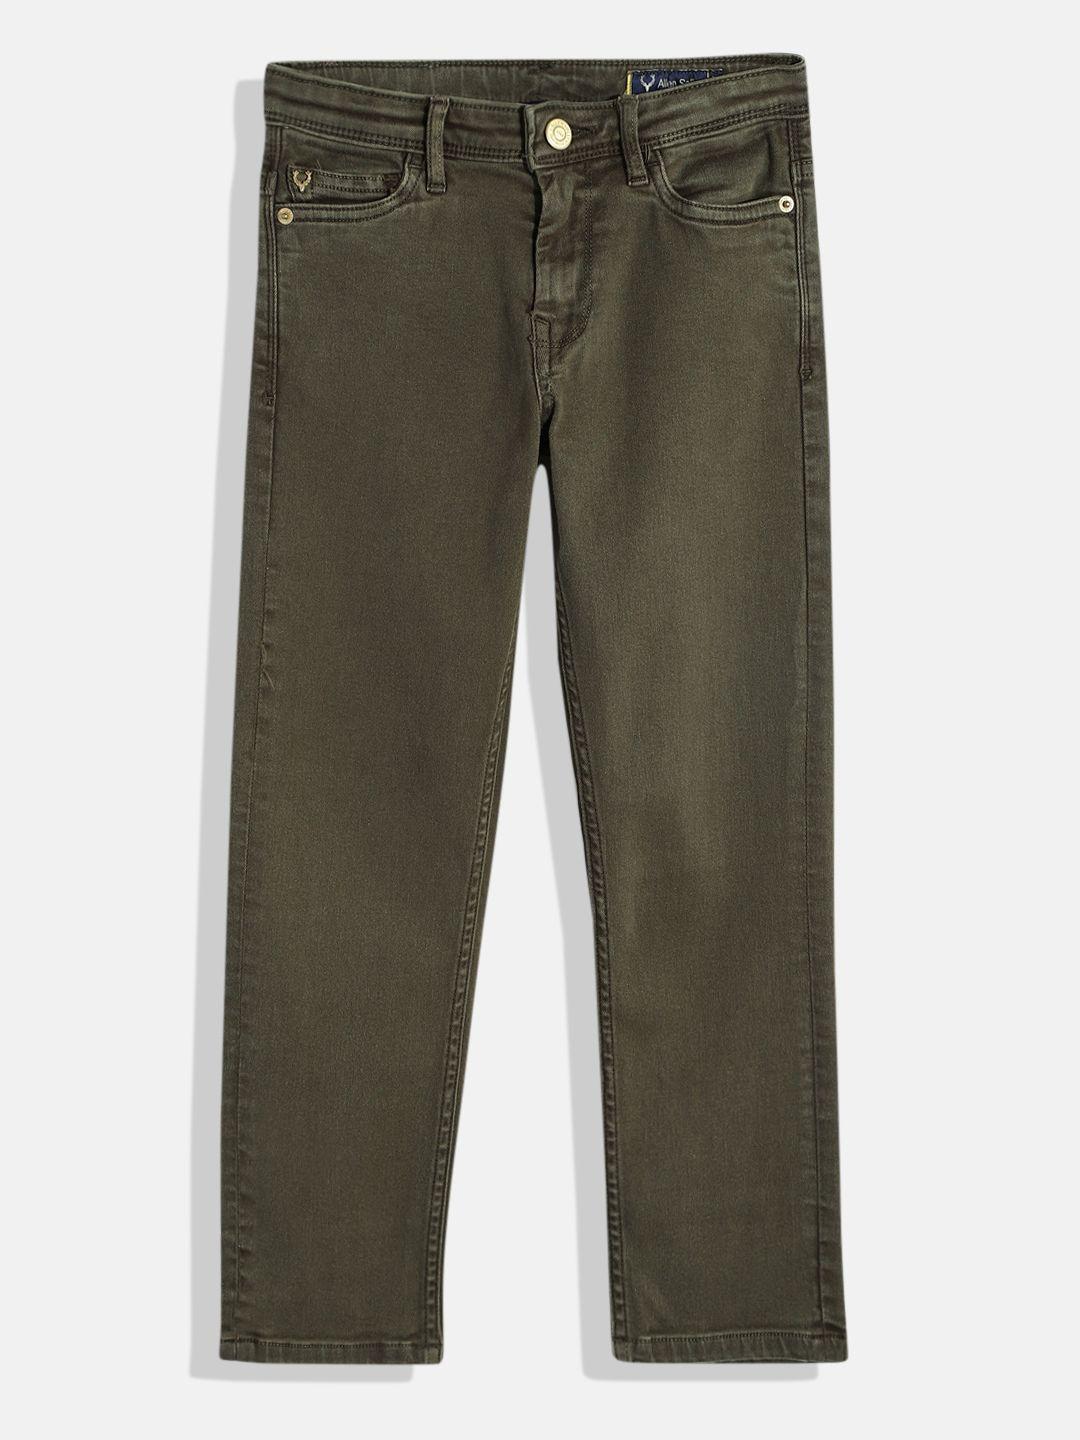 allen solly junior boys olive green stretchable jeans